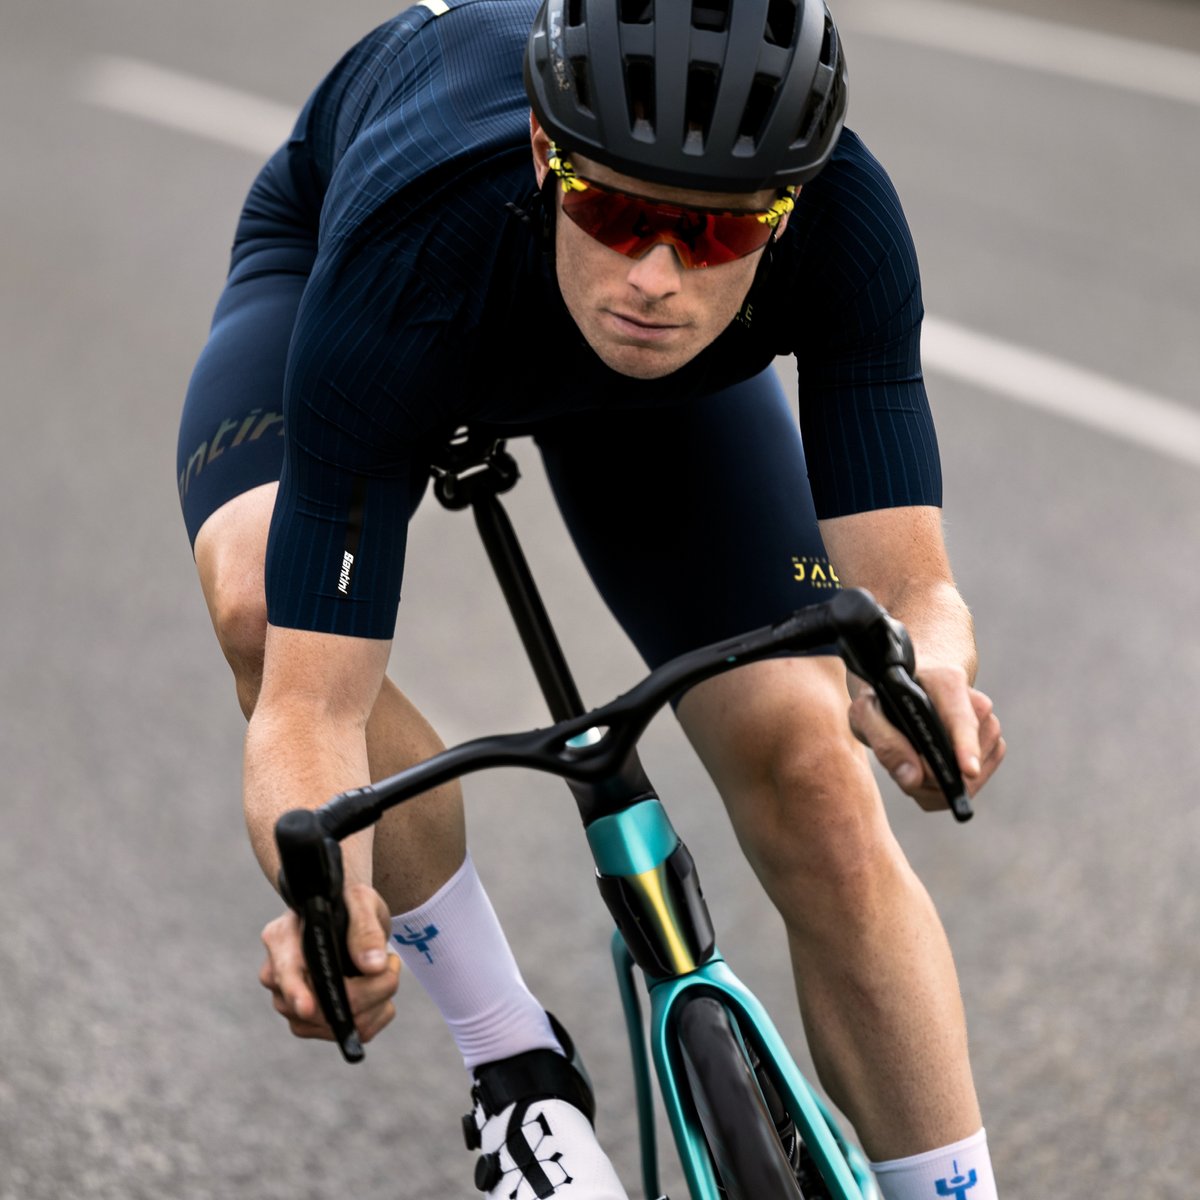 Oltre RC - Official Bike of the Tour de France, the race that turns riders into legends.
Shop now 👉bit.ly/3Pi6OsW

#Bianchi #LeTourOfficialBianchi #TDF2023 #RideBianchi #OltreRC #RideTheLegend